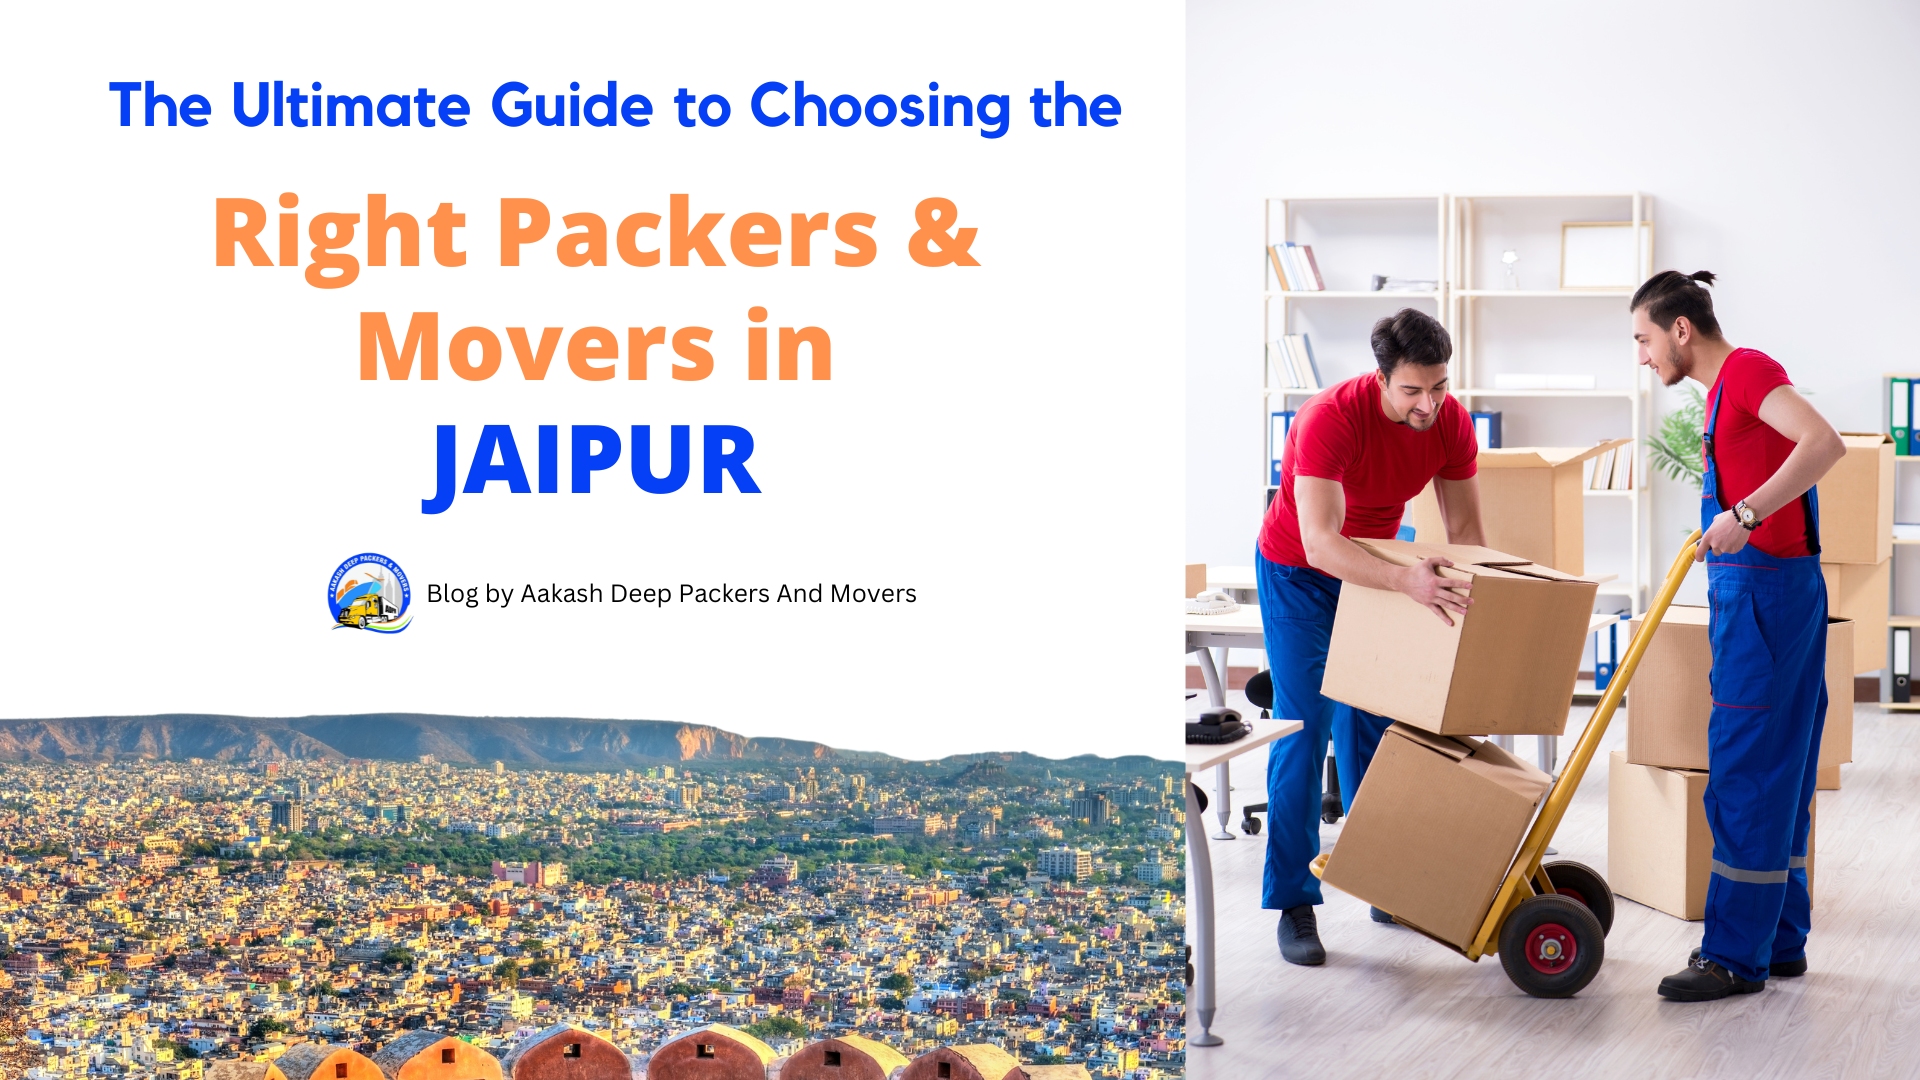 The Ultimate Guide to Choosing the Right Packers and Movers in Jaipur